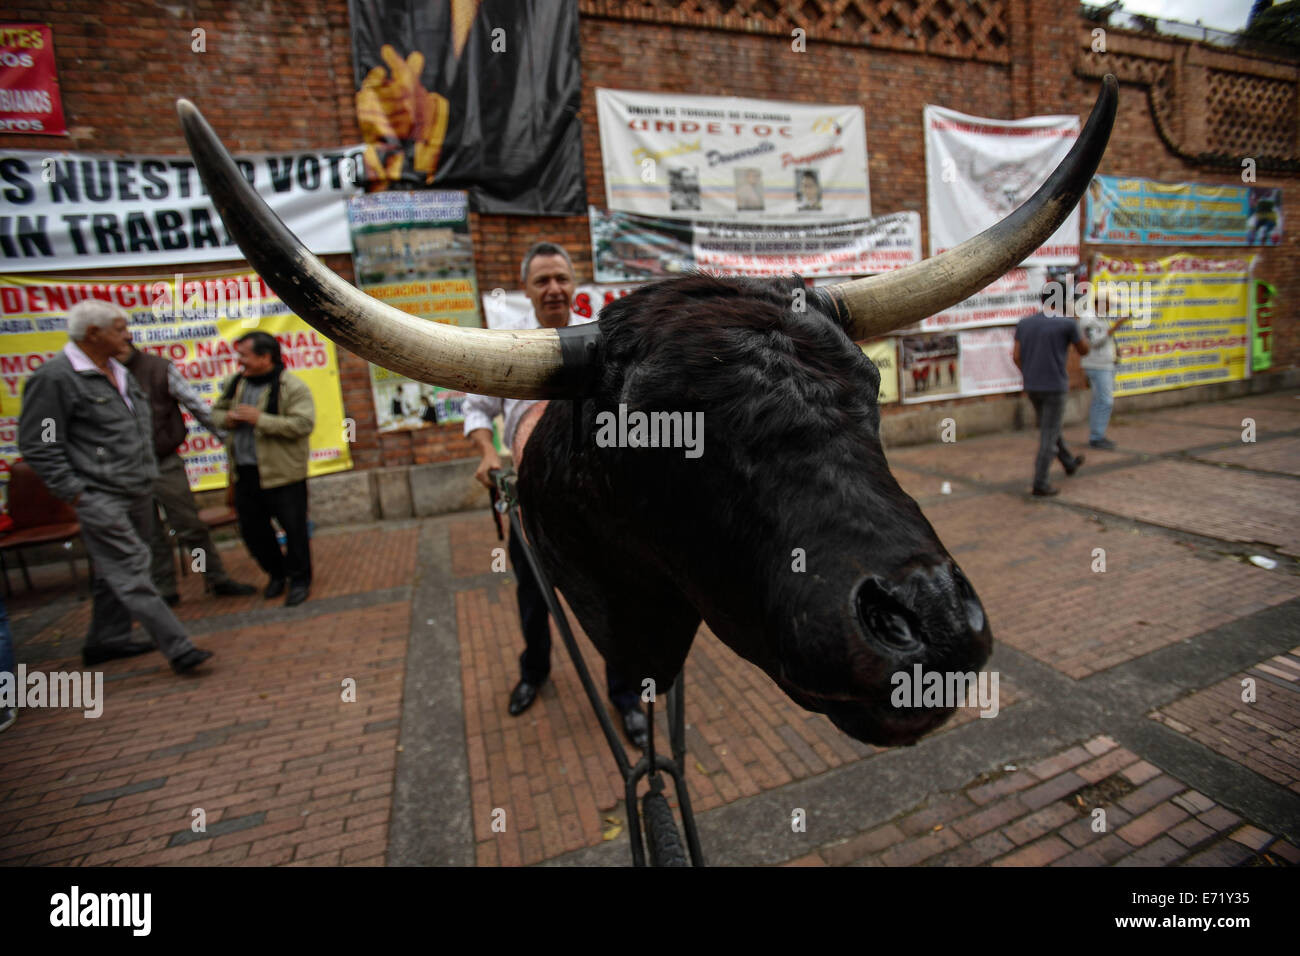 Bogota Colombia 3rd Sep 2014 A Man Conducts A Practice Bull During A Hunger Strike In Favor